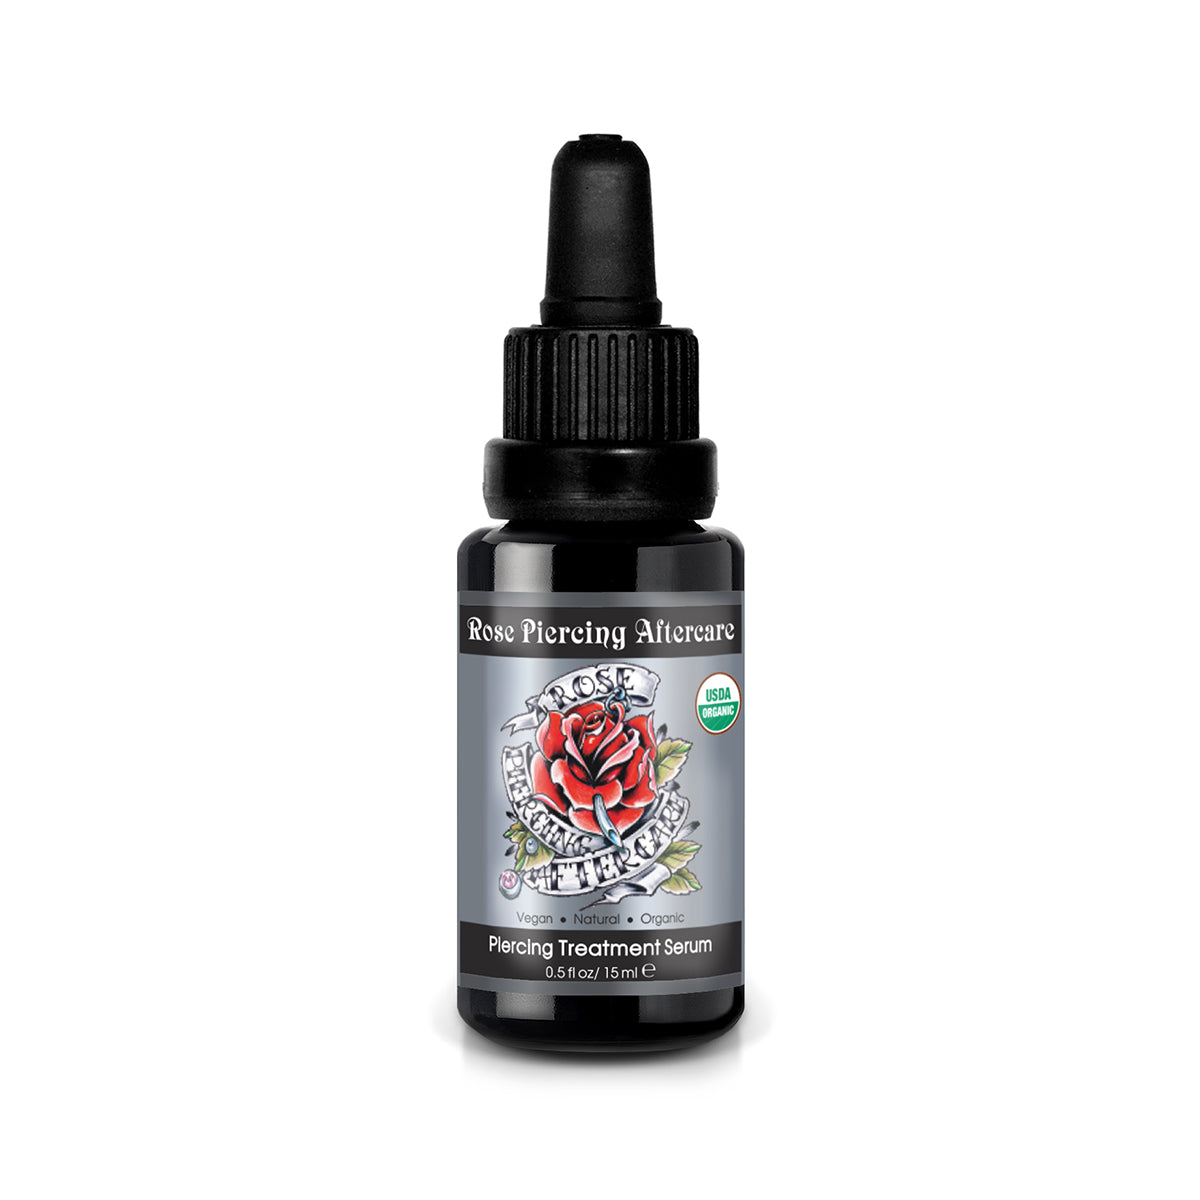 After many months of hard work, we have developed a super-healing body piercing serum. It's a unique blend of natural botanicals which have been used for thousands of years. After extensive research on the different tribal rituals; careful studying of the properties of different botanicals, and conducting thousands of experiments we have finished our Rose Body Piercing Aftercare.